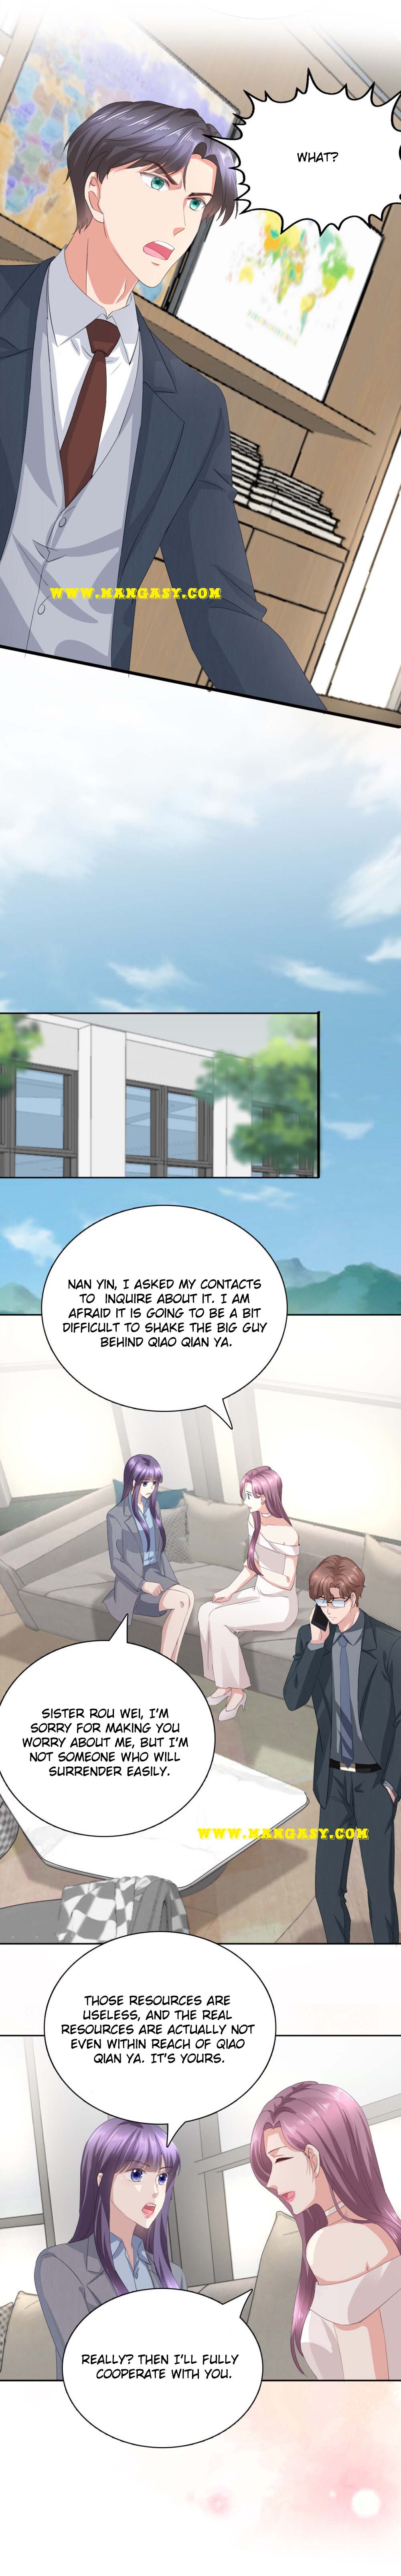 A Deadly Sexy Wife: The Ceo Wants To Remarry - Page 2